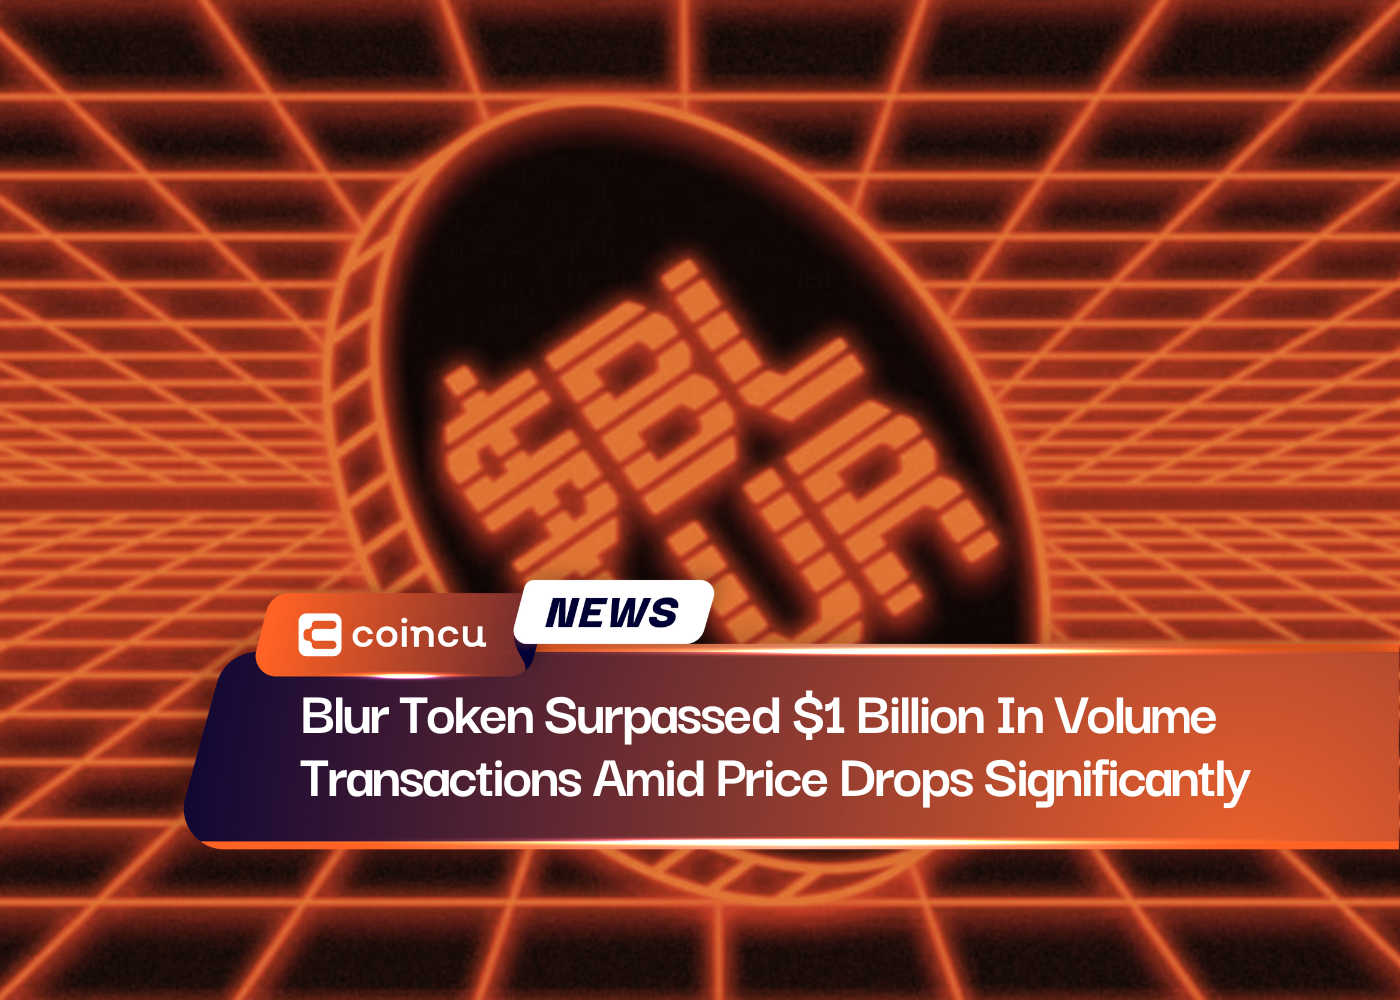 Blur Token Surpassed $1 Billion In Volume Transactions Amid Price Drops Significantly